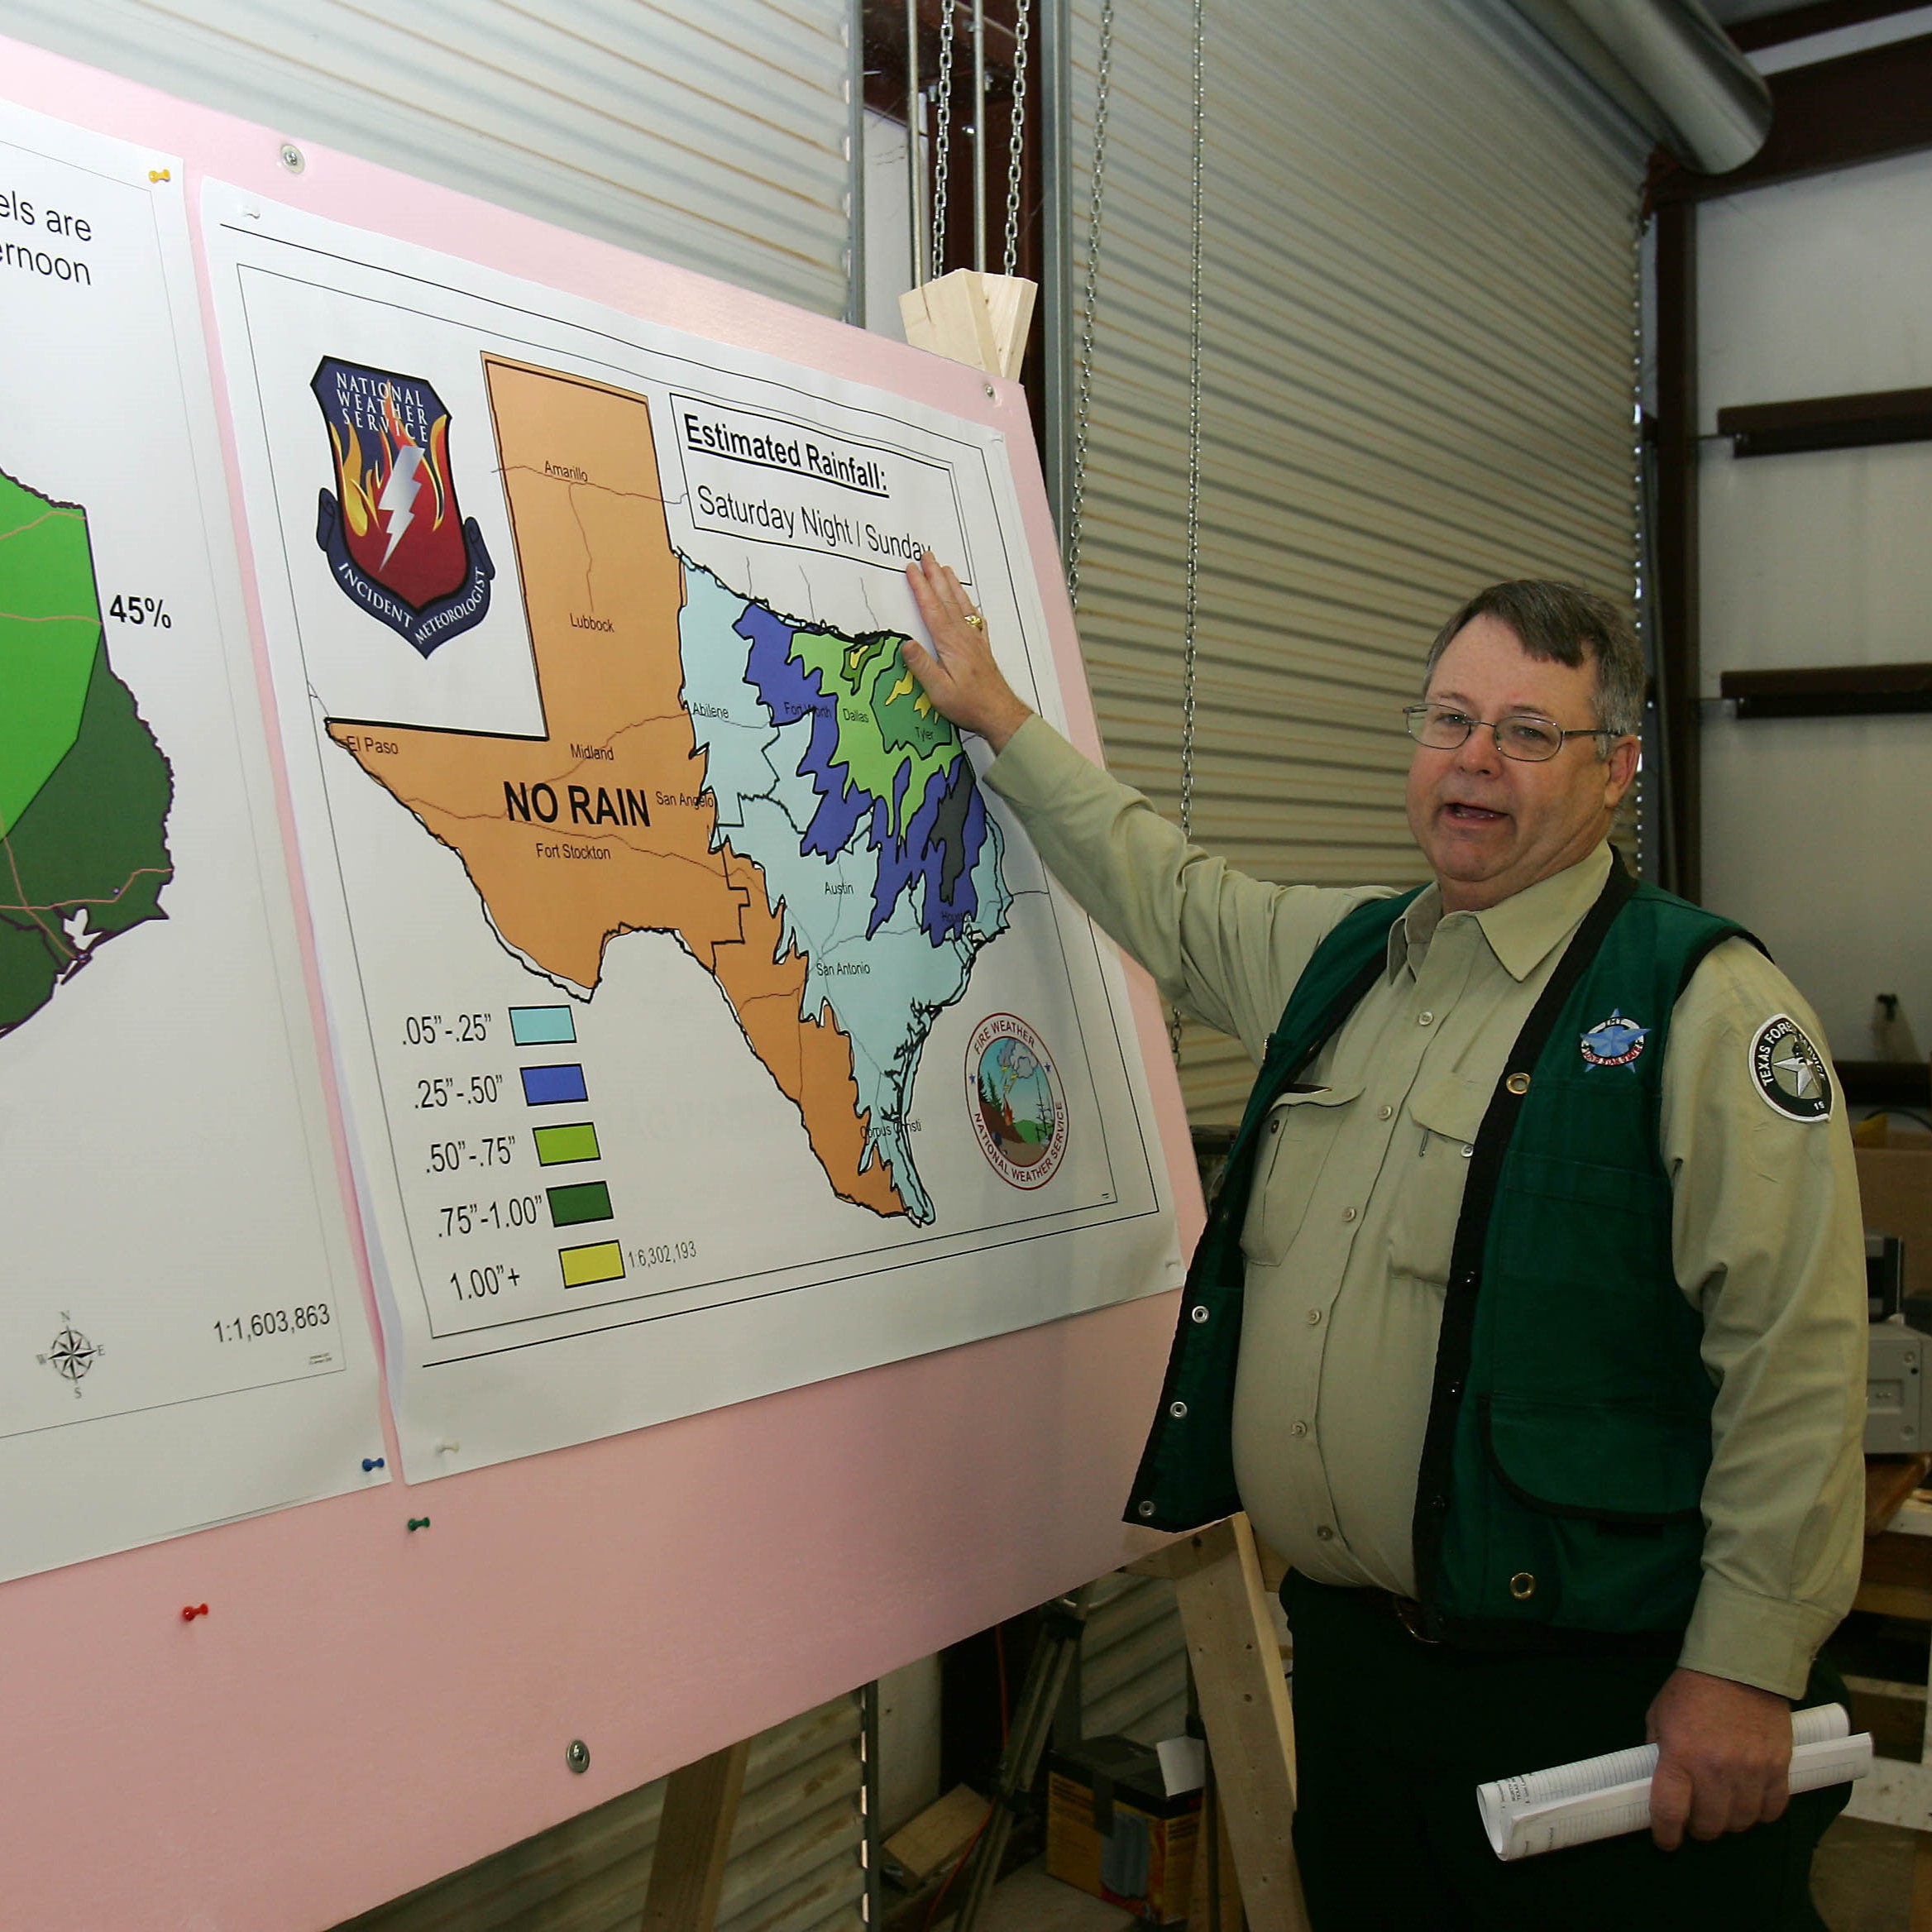 Texas A&M Forest Service employee earns prestigious national award for fire protection